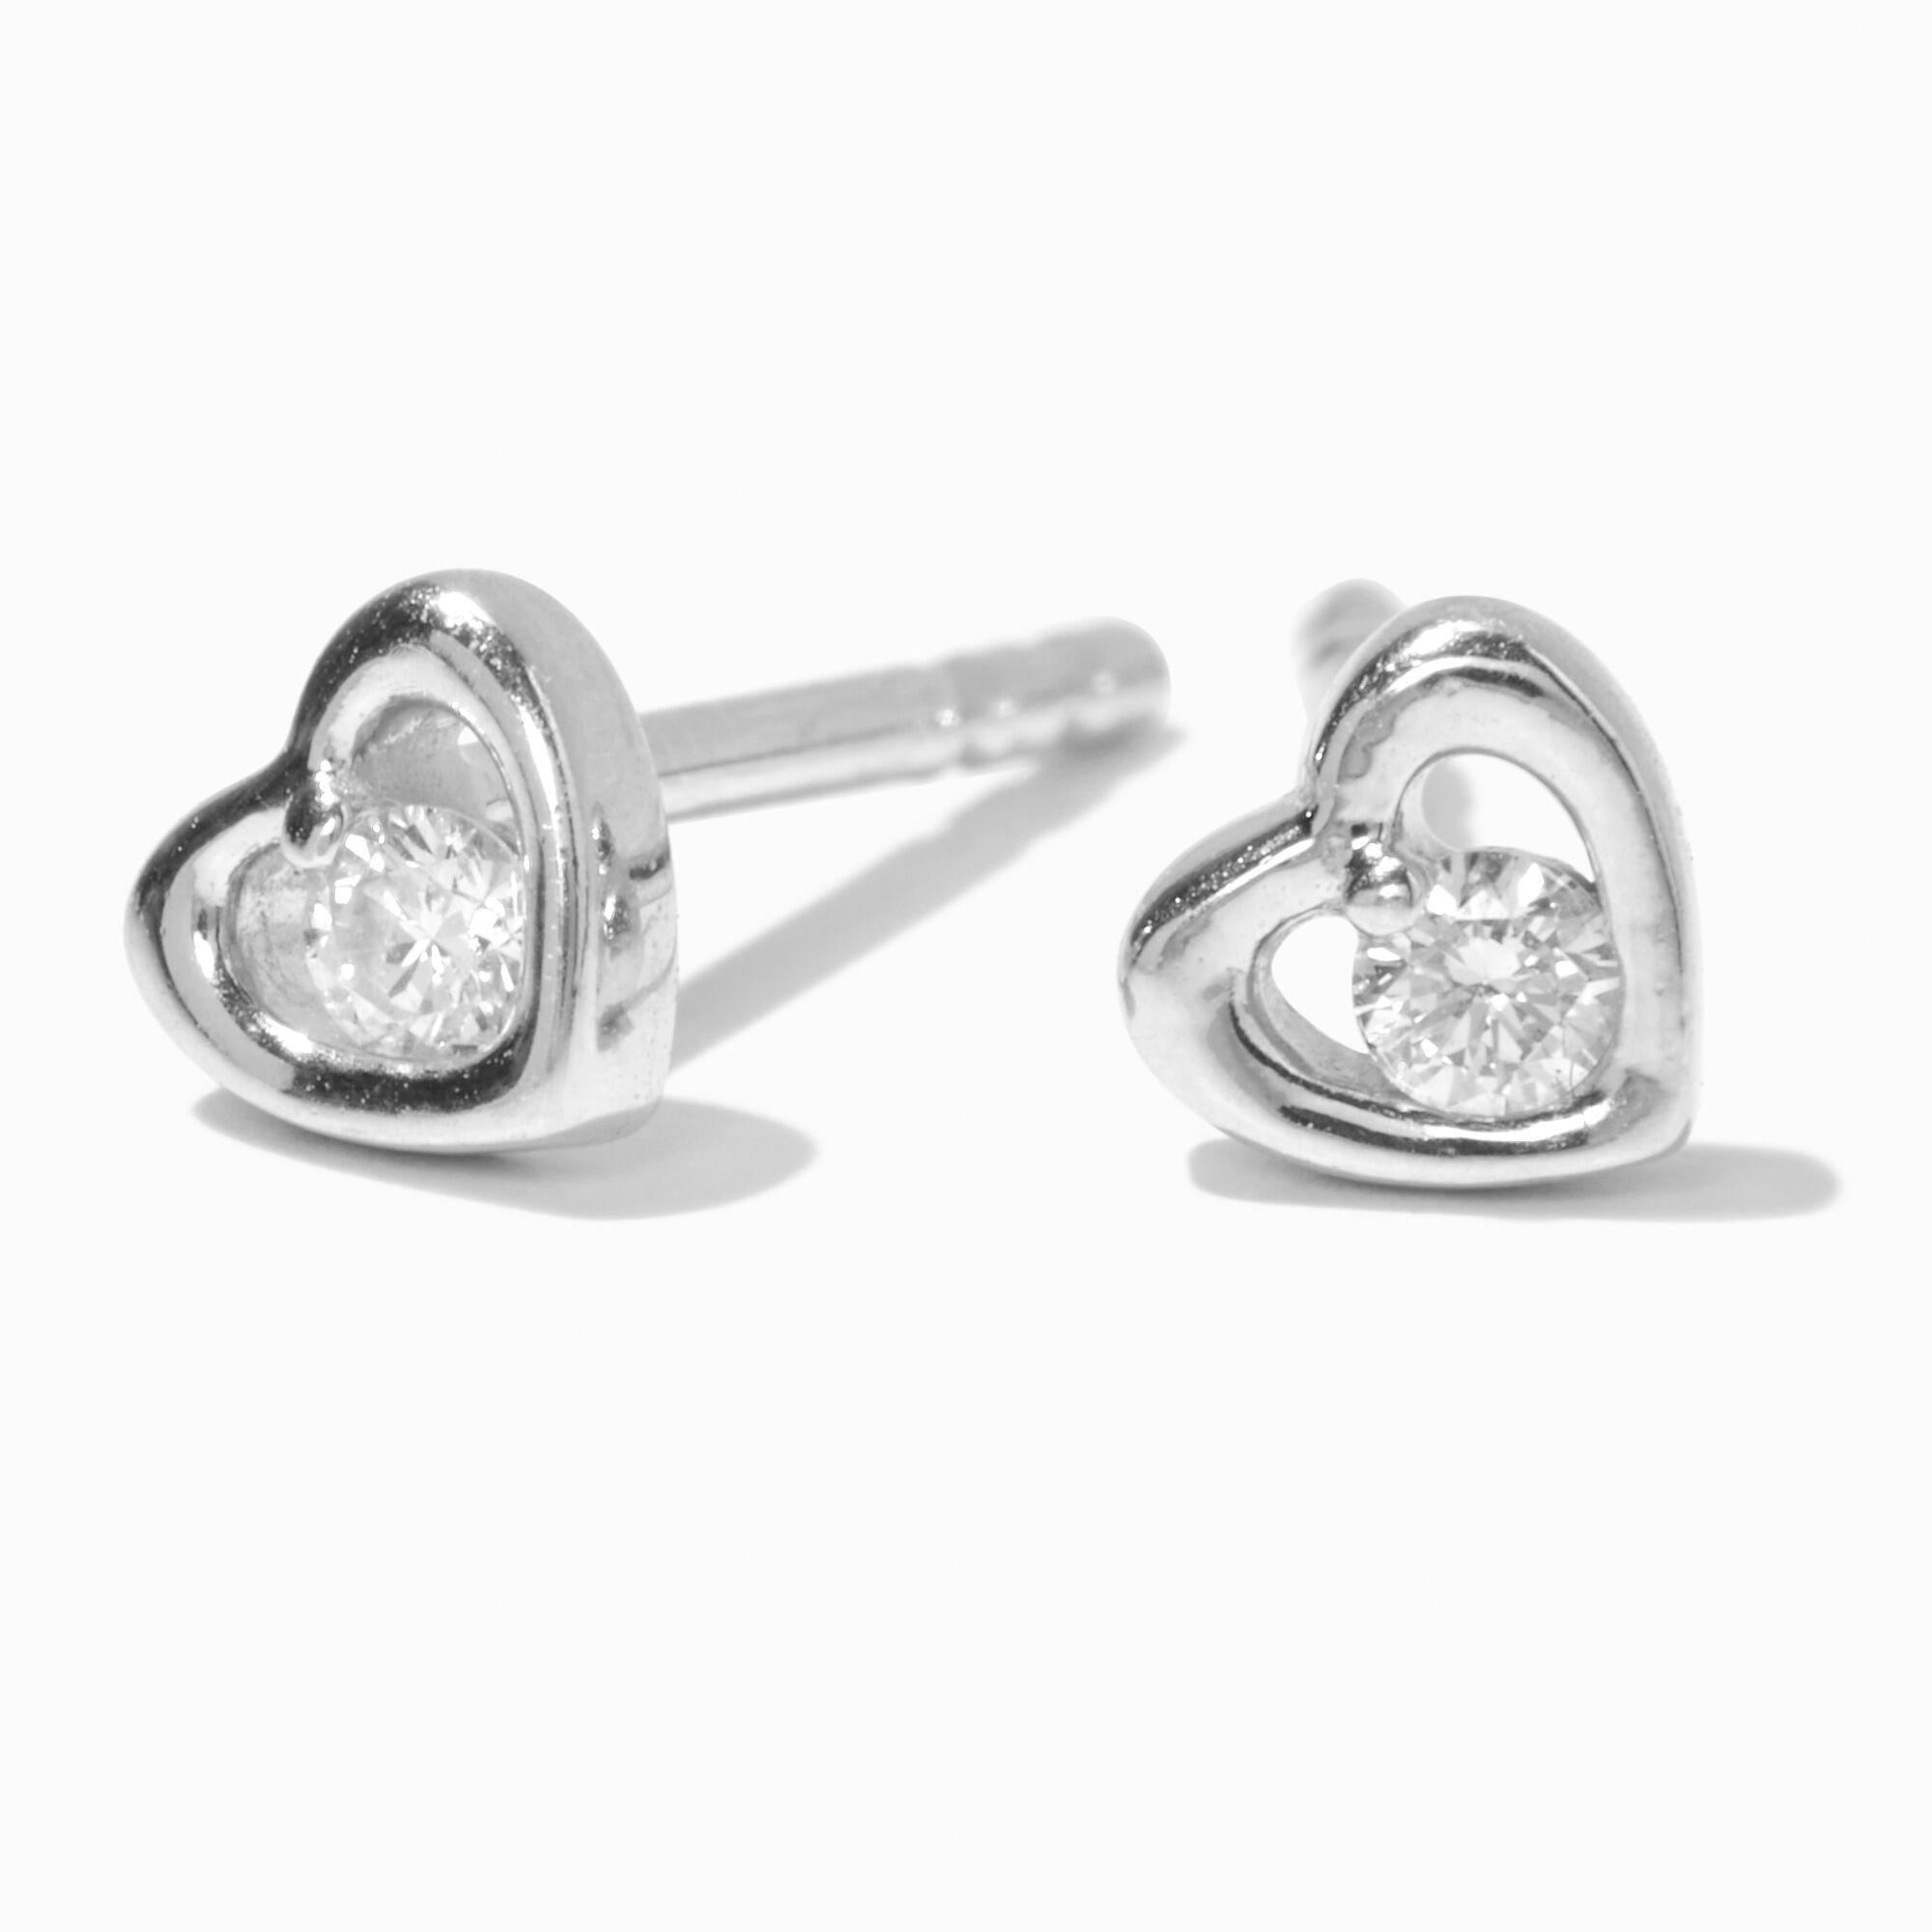 View C Luxe By Claires 120 Ct Tw Laboratory Grown Diamond Open Heart Stud Earrings Silver information